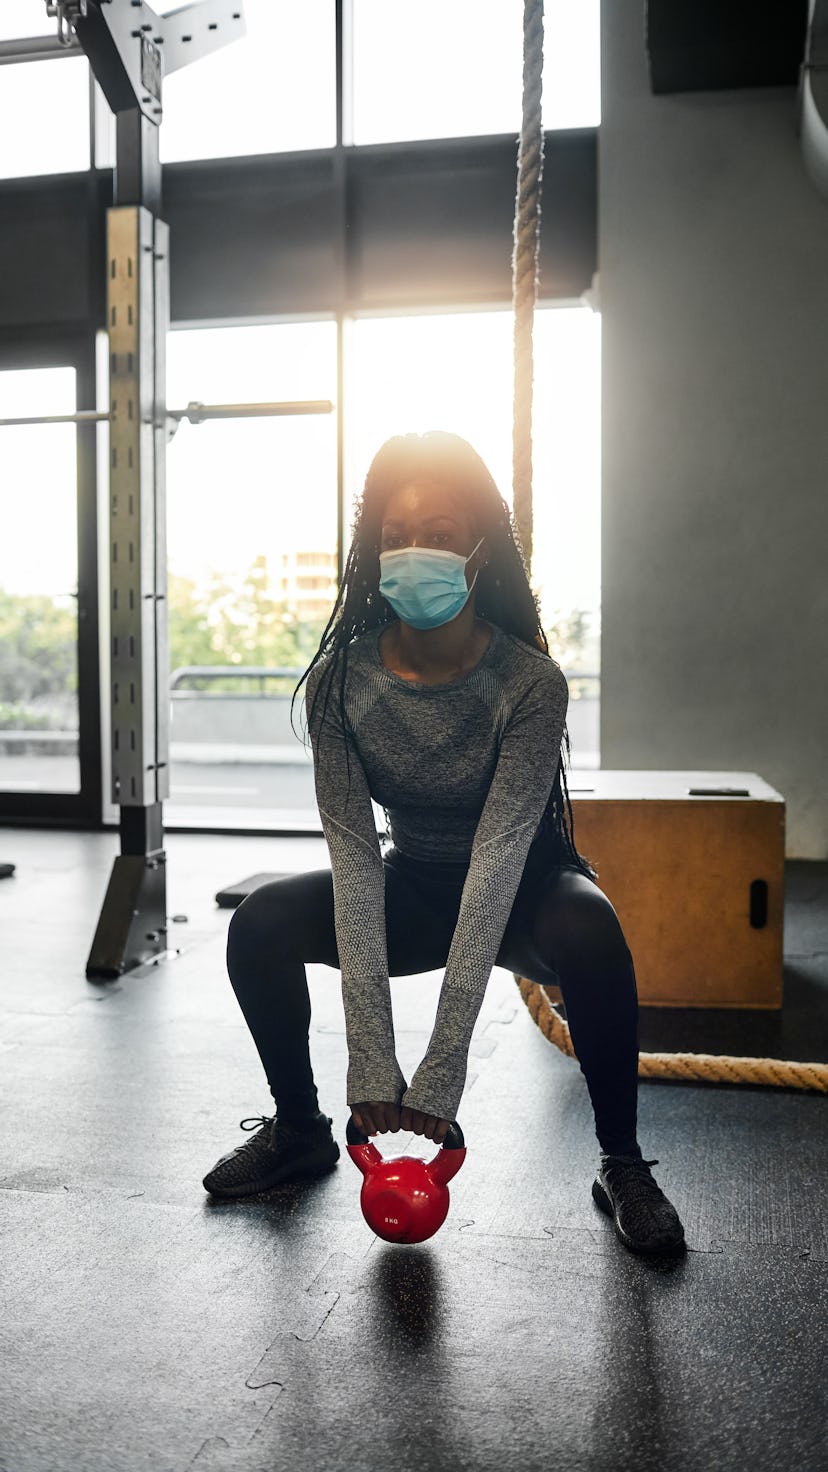 A person wearing a mask performs a sumo kettlebell squat in the gym